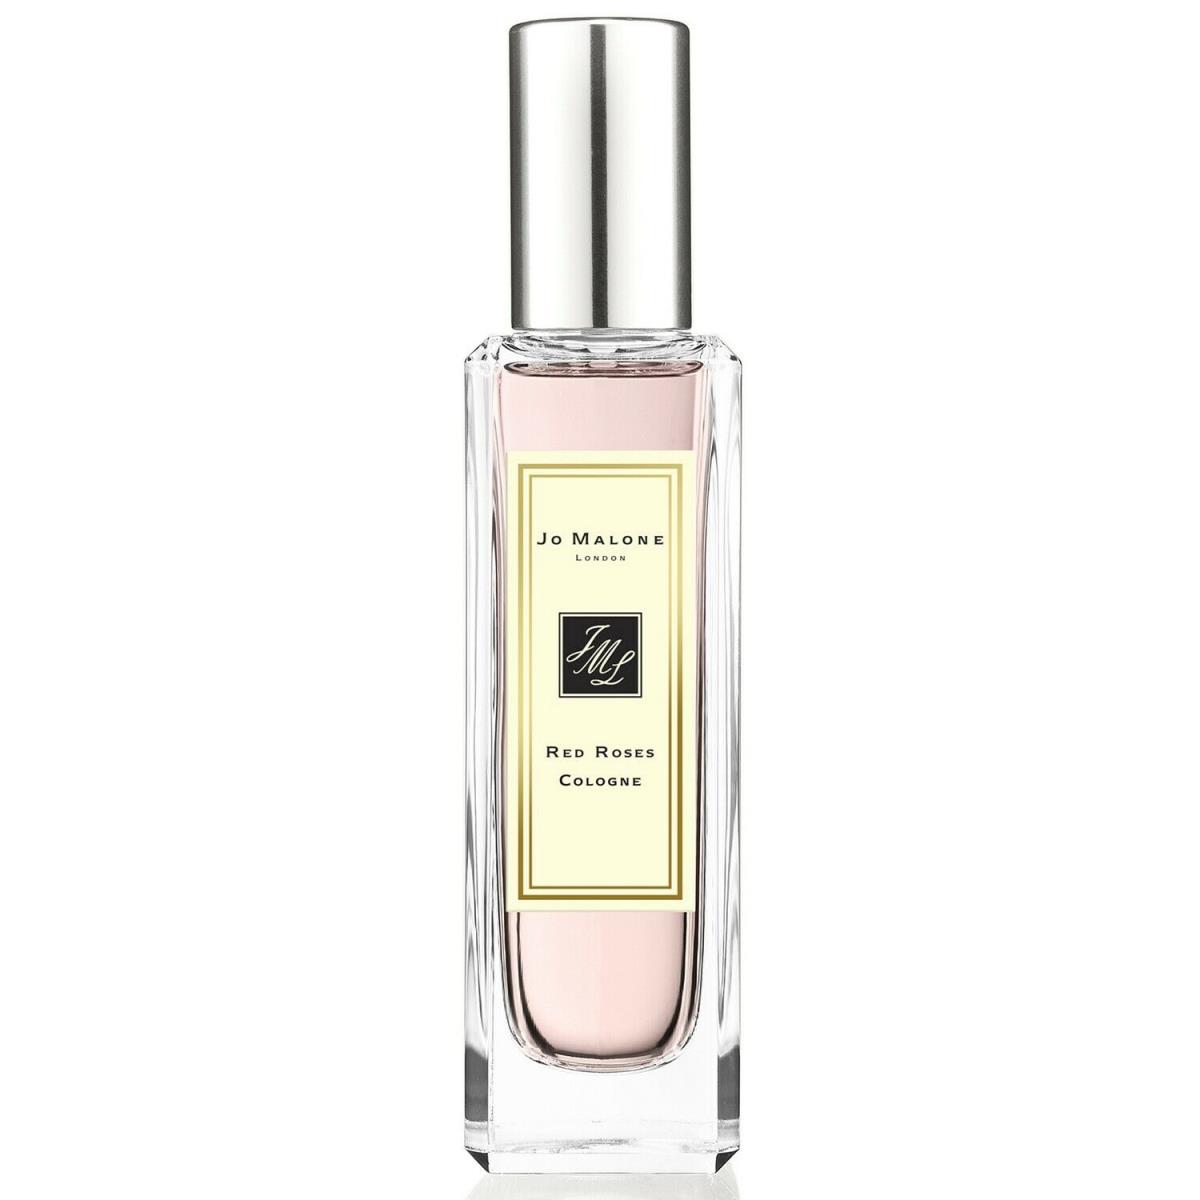 Jo Malone London Red Roses Cologne 1 oz